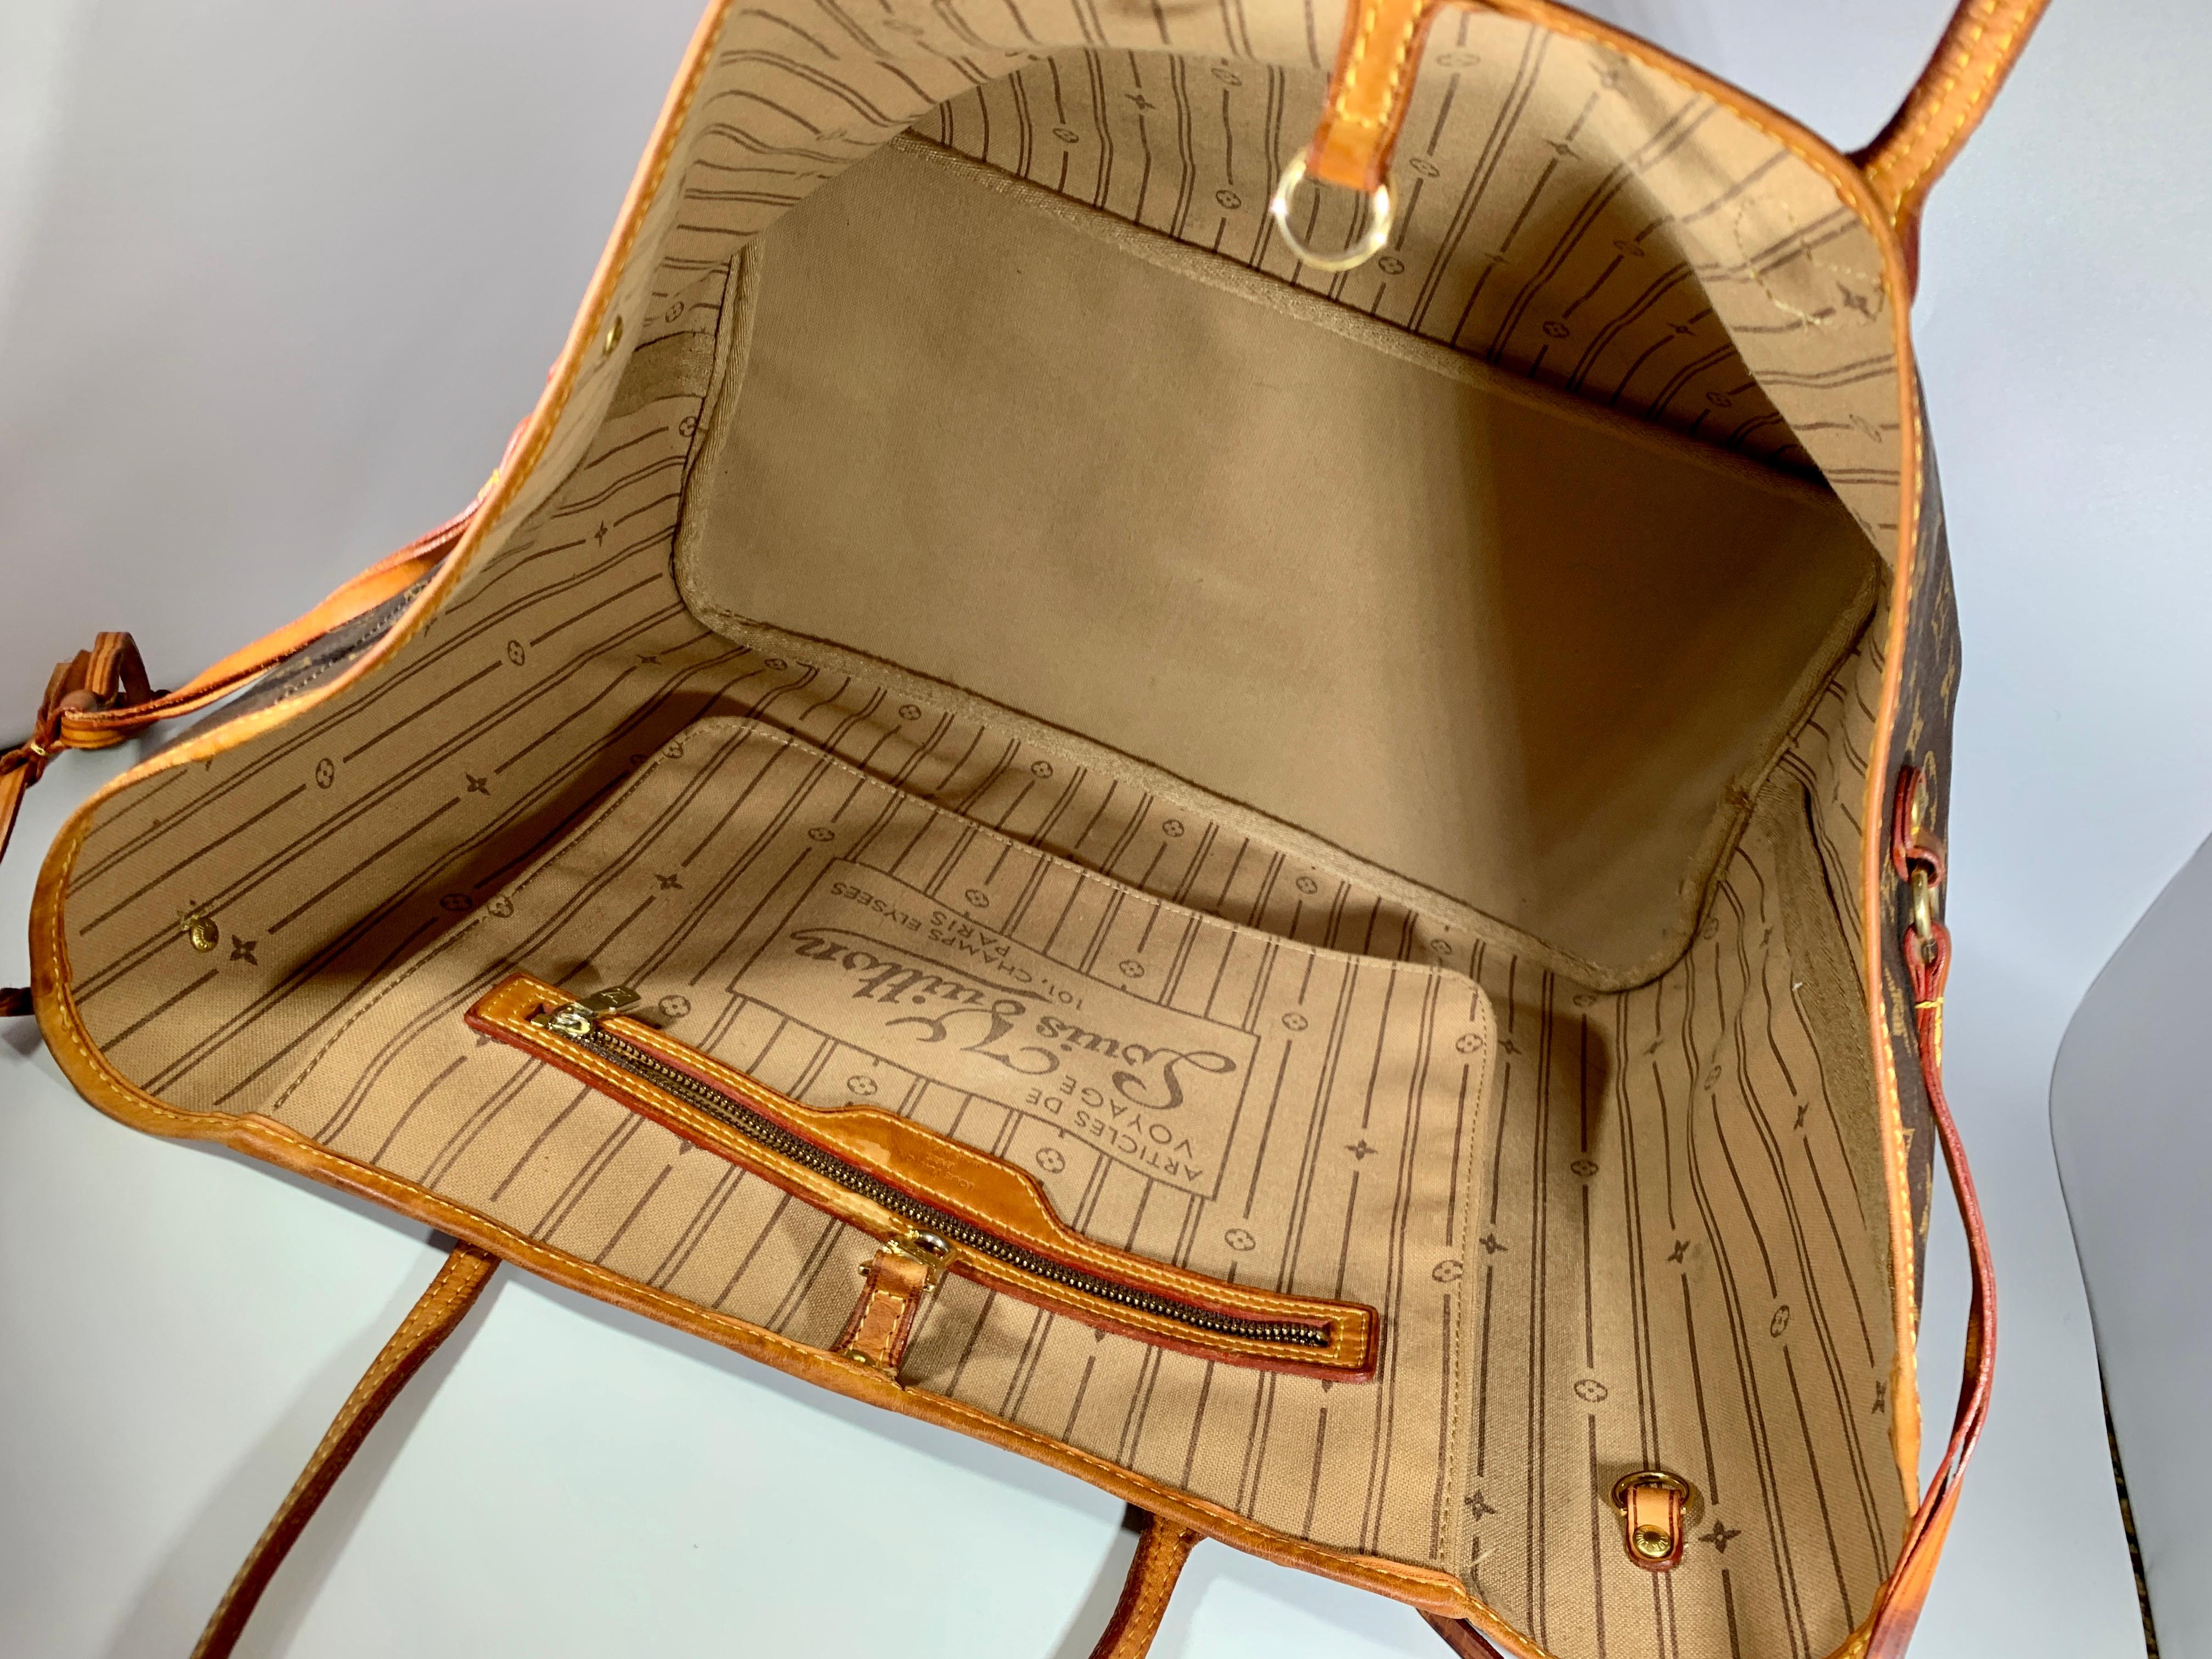 
Brown and tan monogram coated canvas Louis Vuitton Neverfull MM with brass hardware, dual flat shoulder straps, tan Vachetta leather trim, drawstring accents at sides, tonal striped canvas lining, single zip pocket at interior wall and clasp